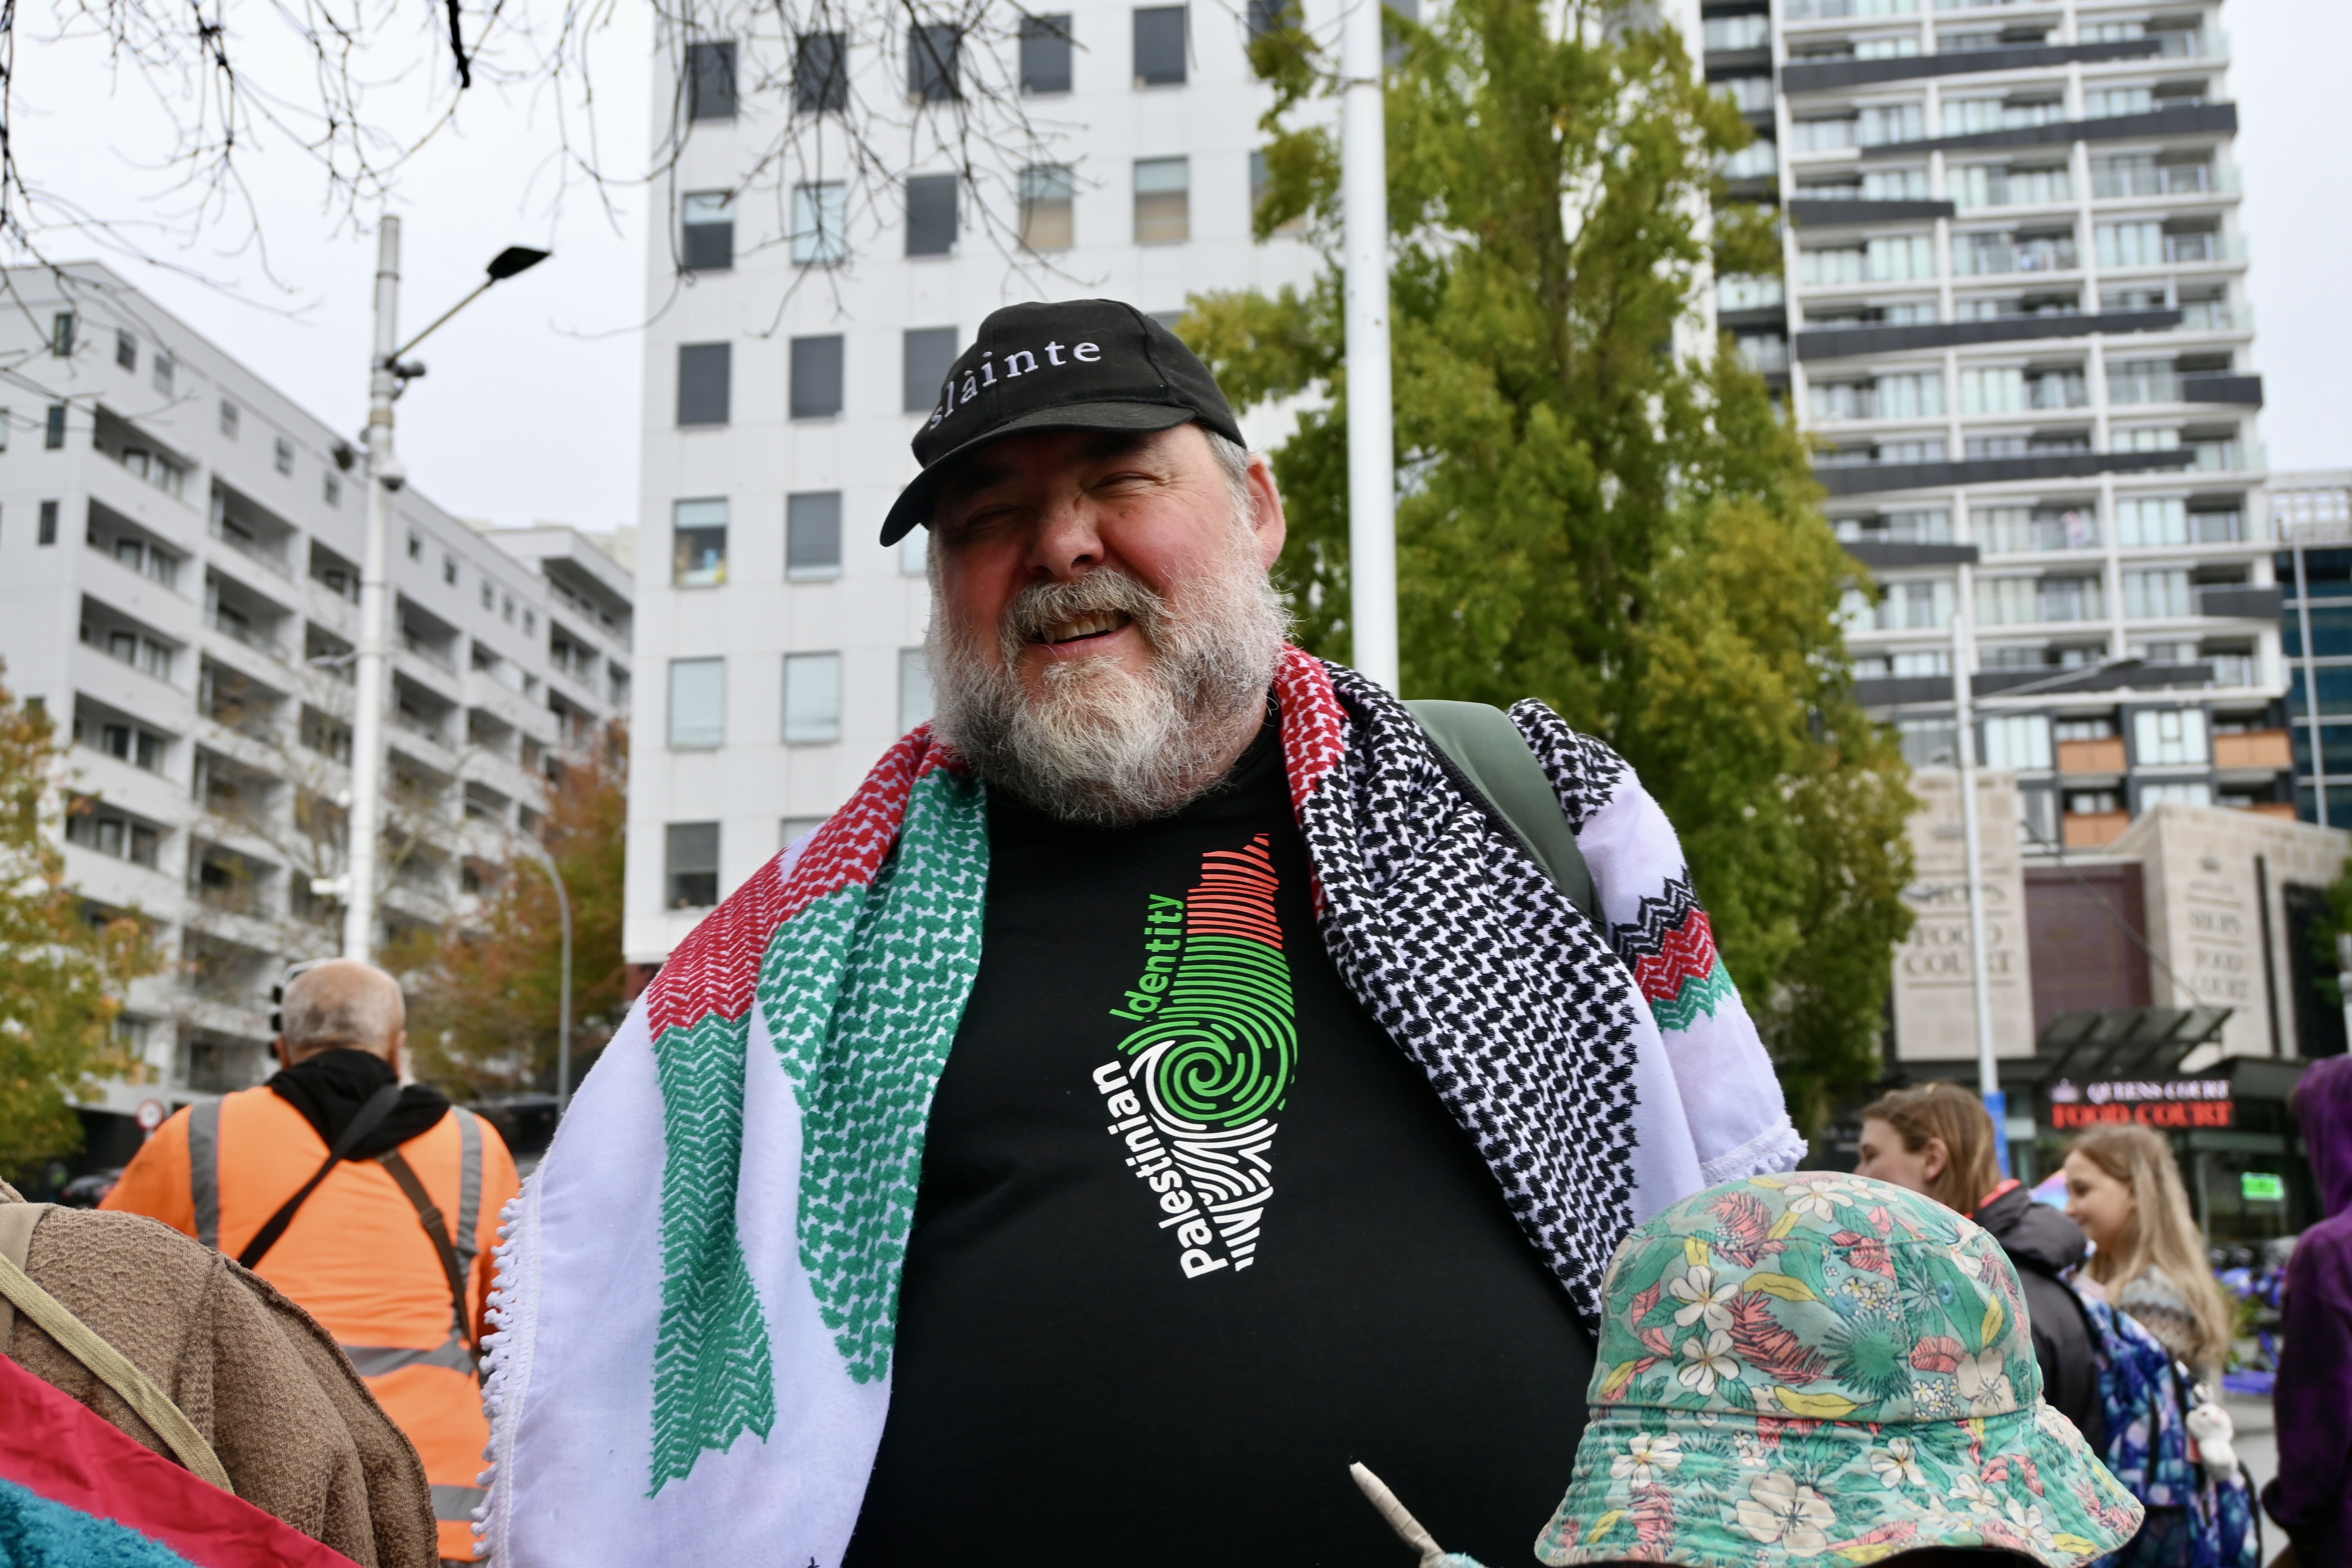 A man with a black cap and pro-Palestine clothing is at a protest in front of city buildings.